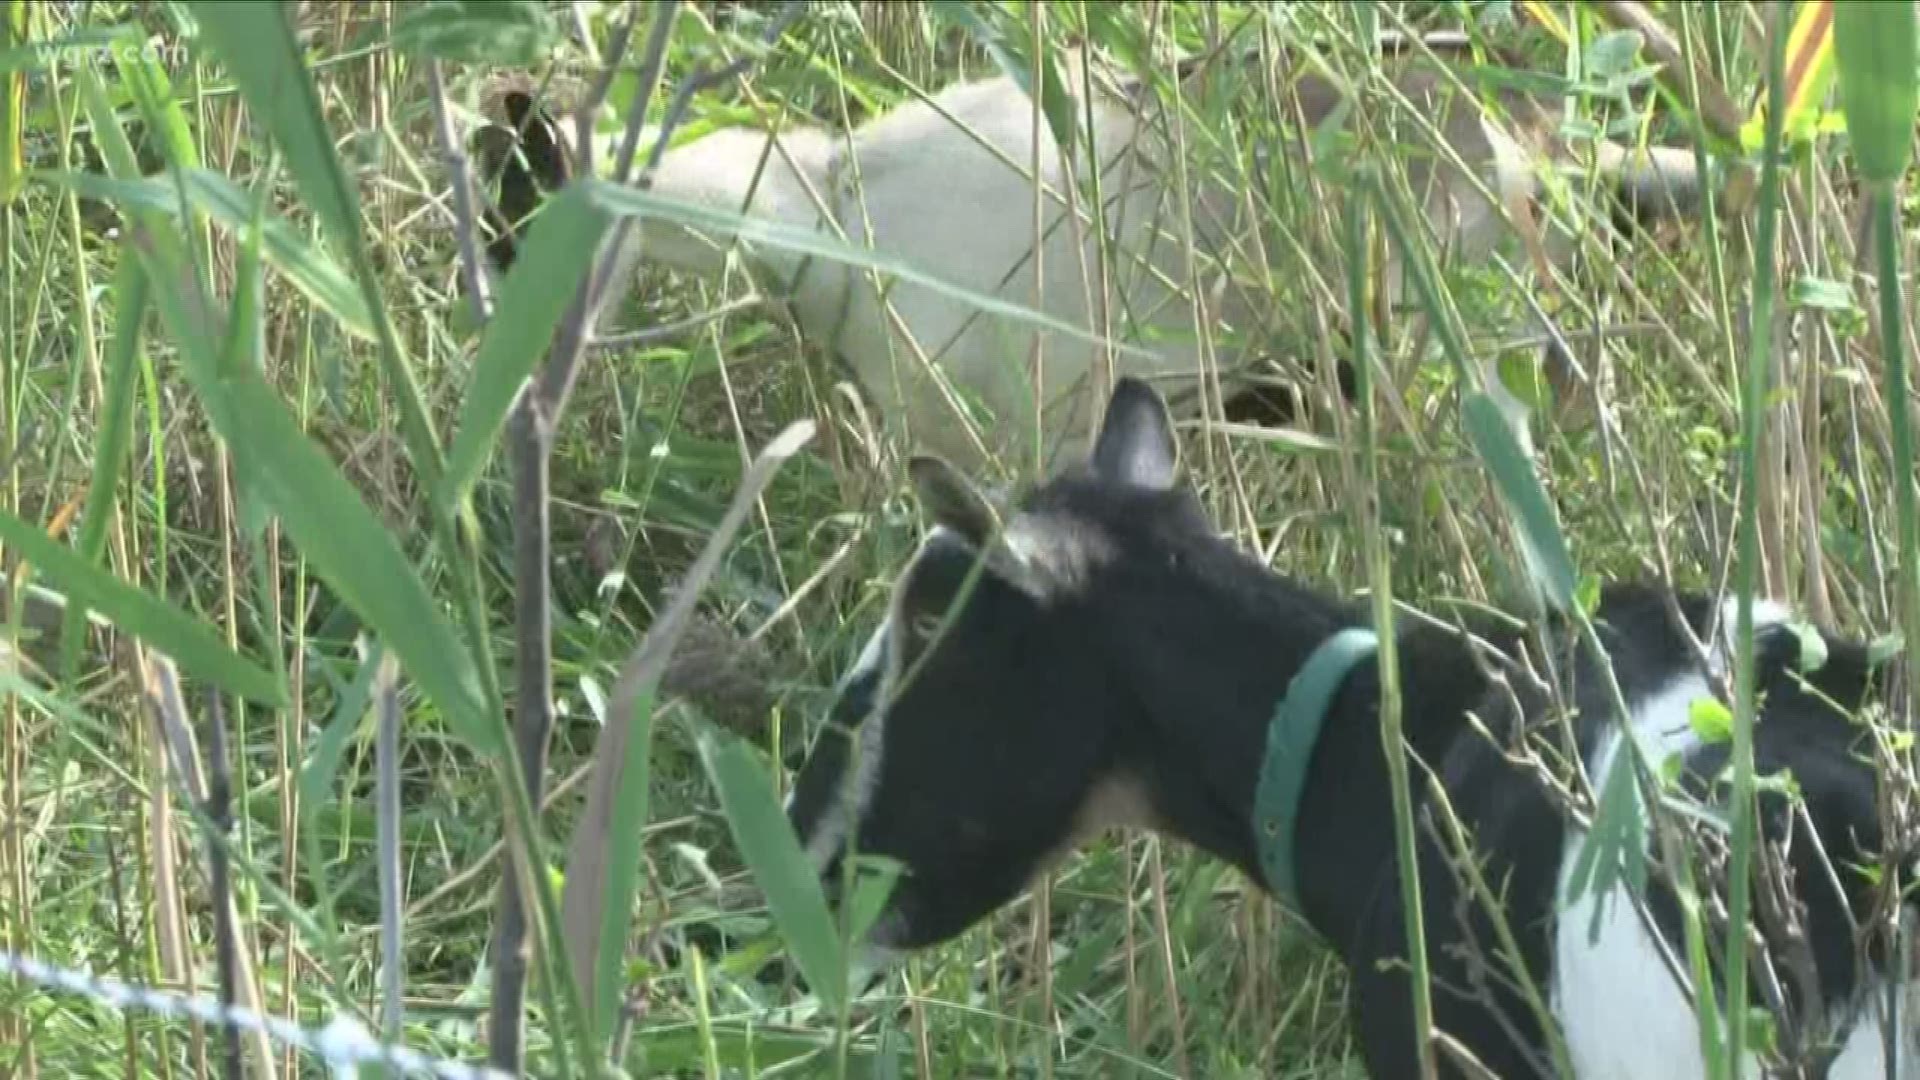 "Goatscaping" has moved to Buffalo's South Park near the Botanical Gardens.